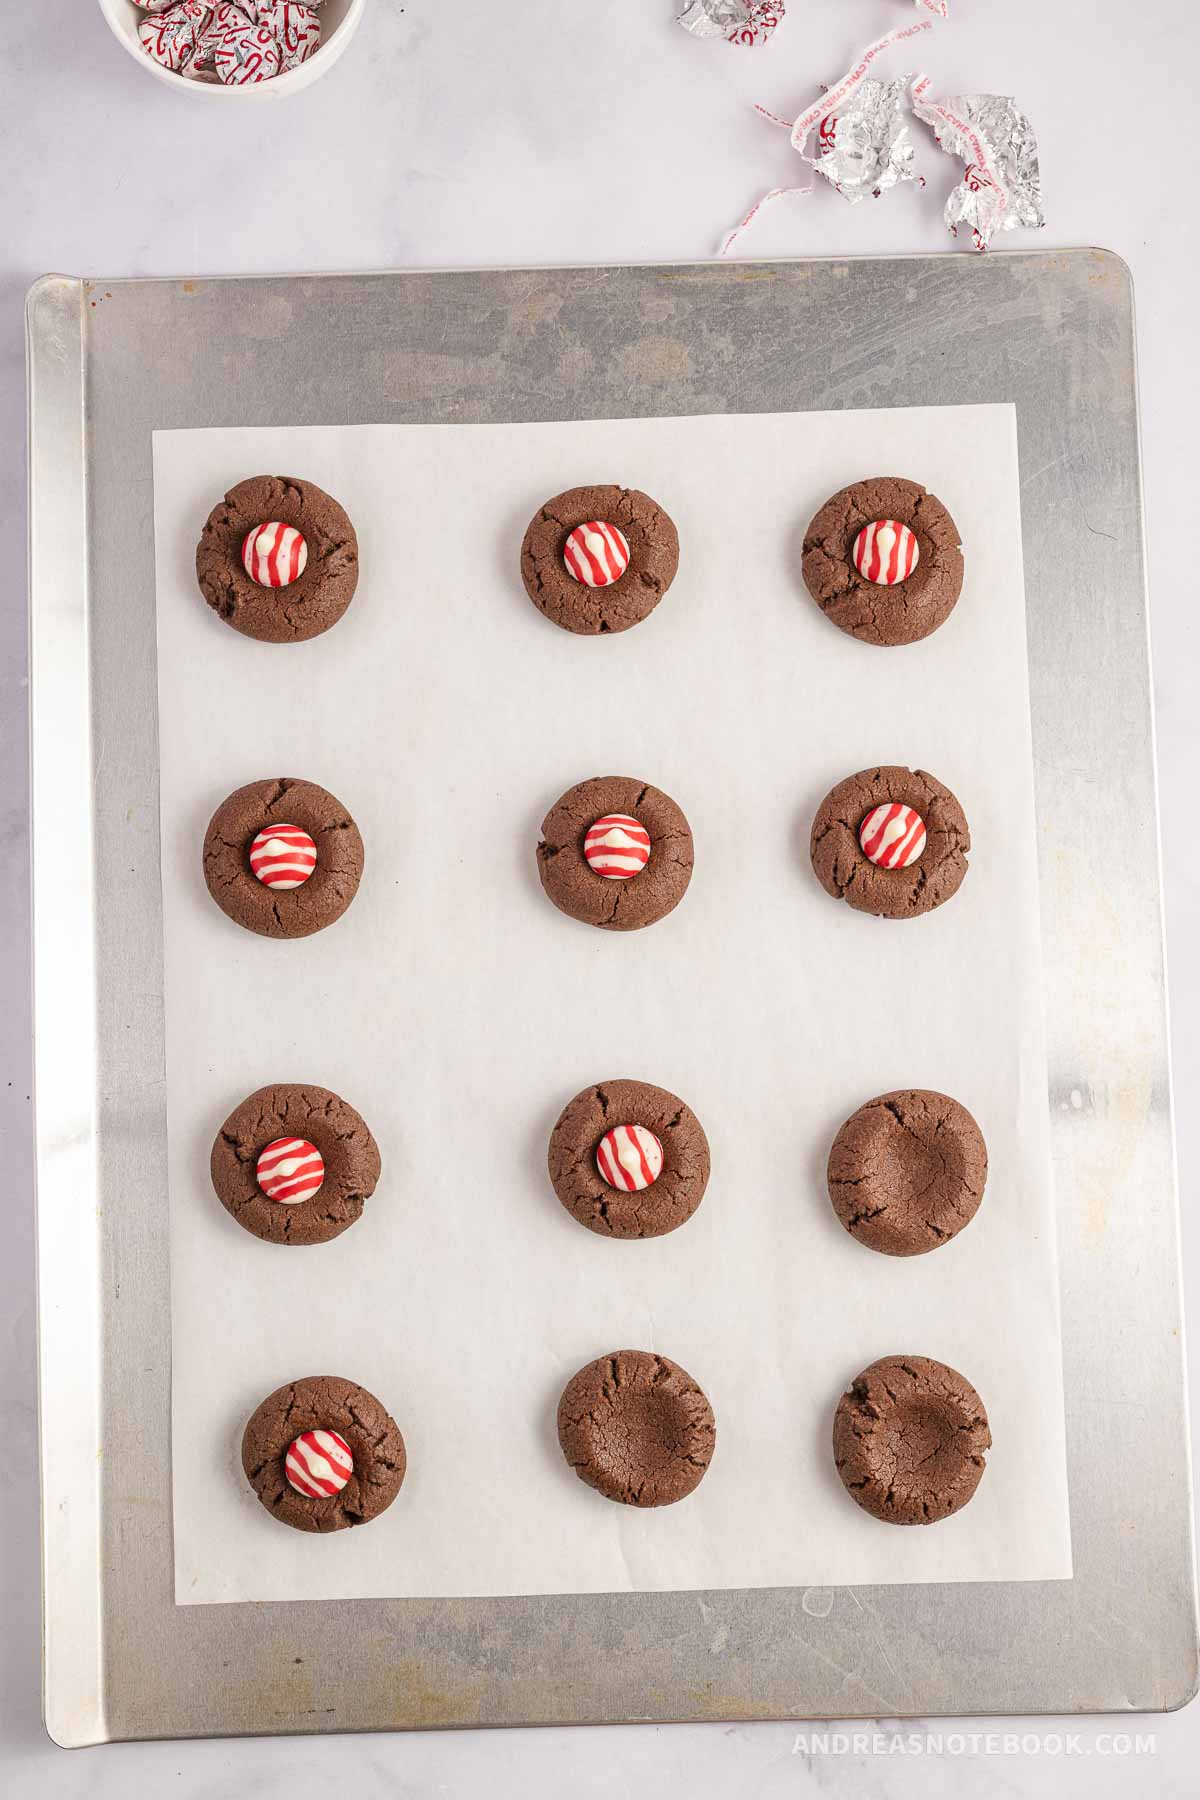 Red and white striped hershey kisses placed on chocolate cookies on baking sheet.